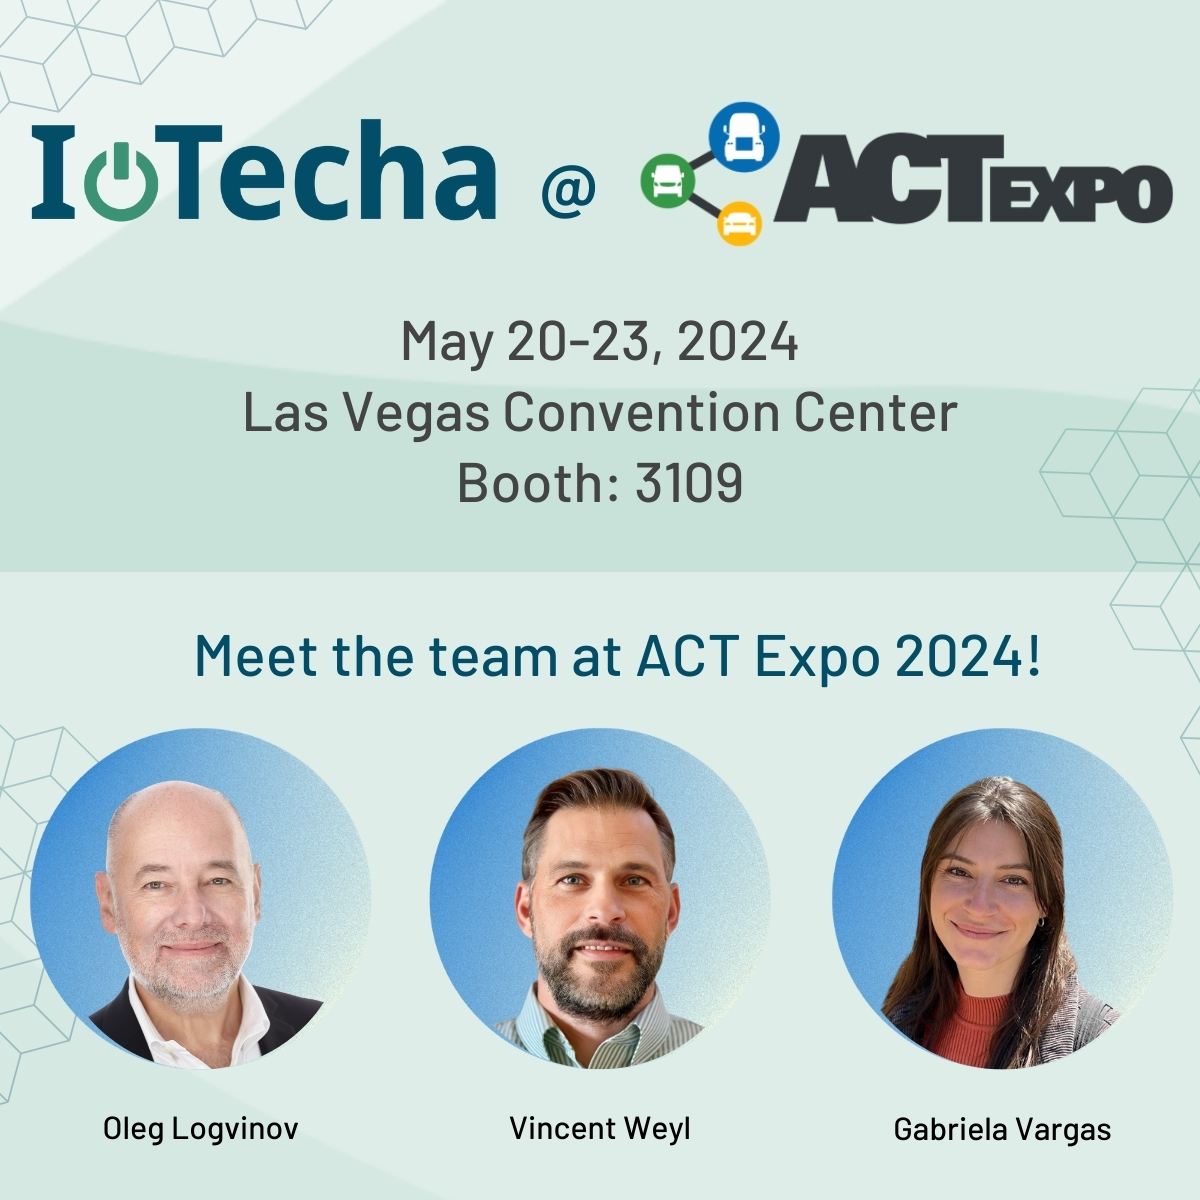 Meet our team at ACT Expo!